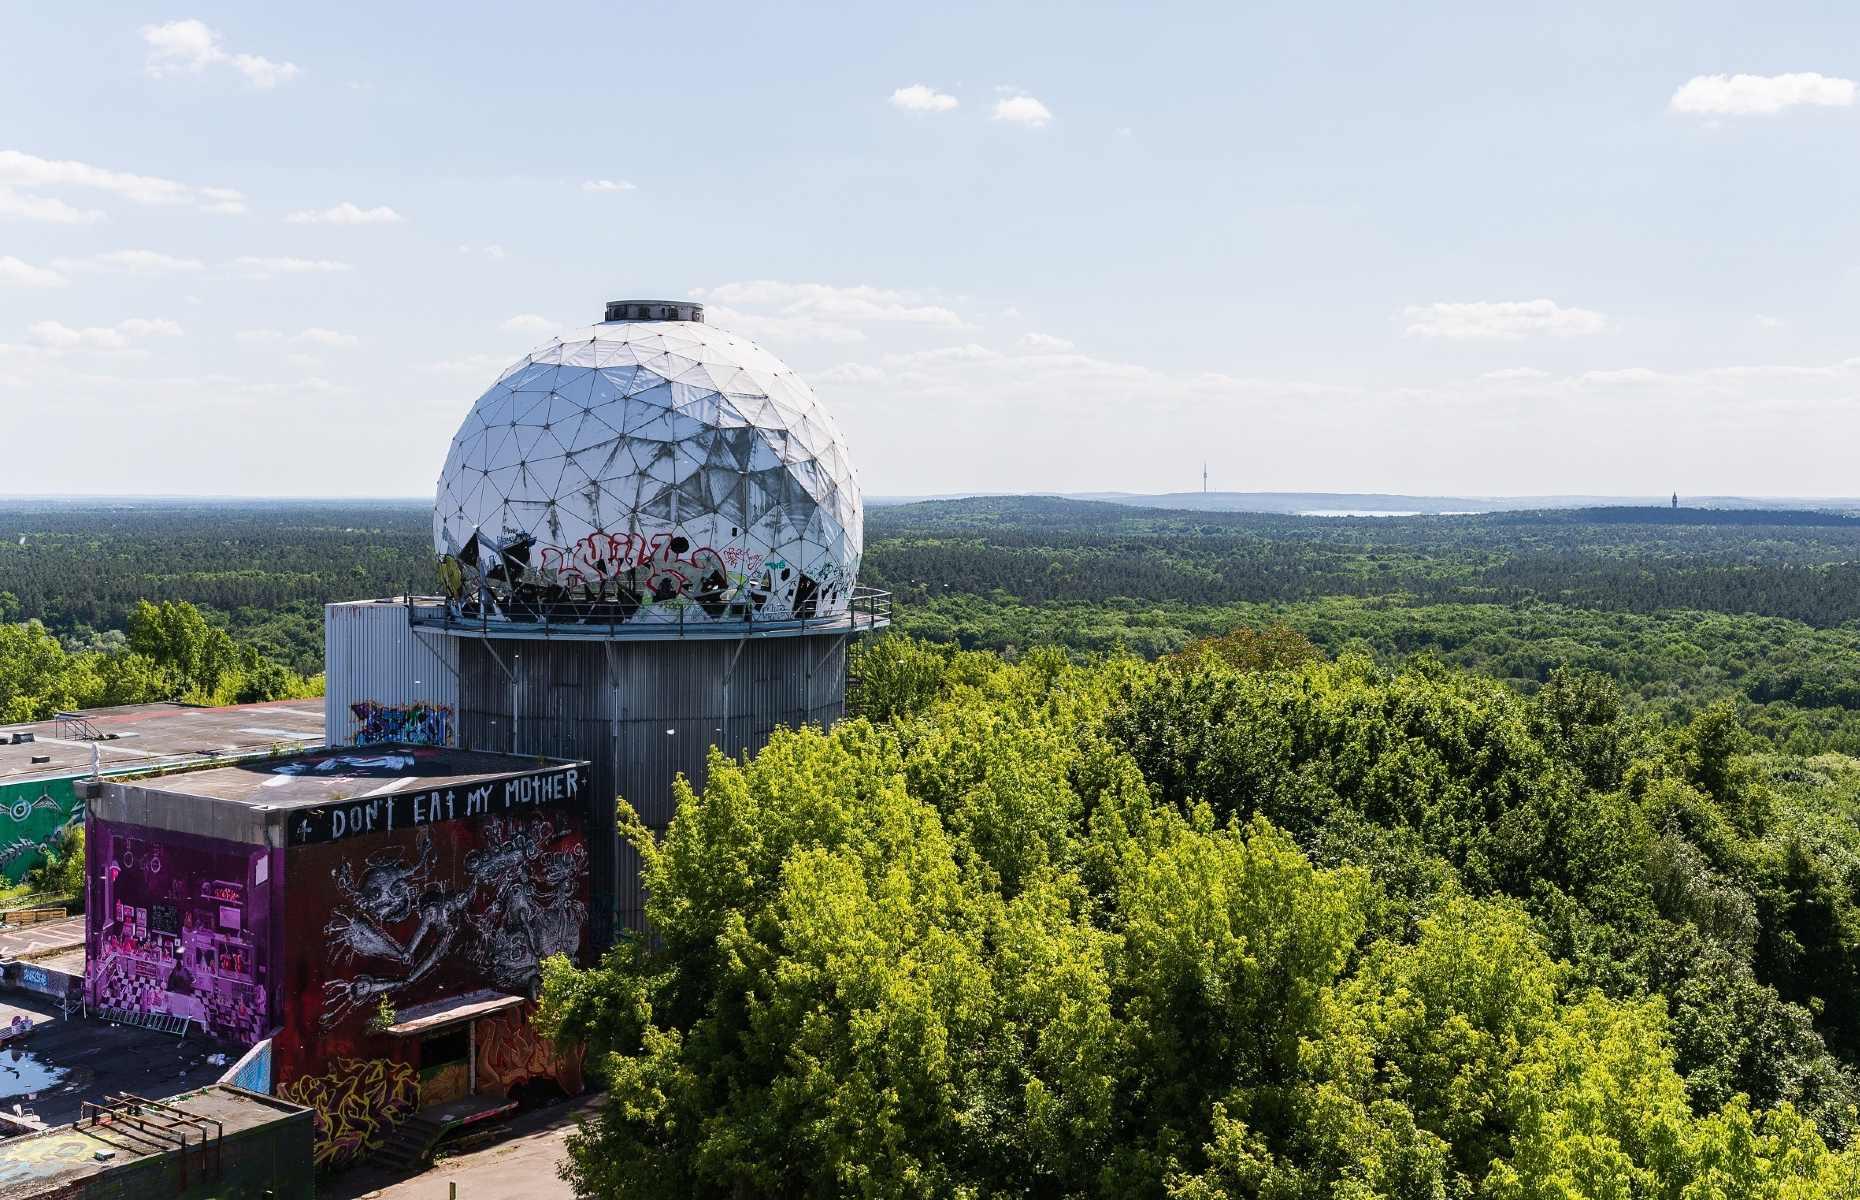 <p>A Cold War relic and former radio tower, <a href="https://www.teufelsberg-berlin.de/en/">Teufelsberg</a> stands at what used to be the highest point in West Berlin, atop a manmade hill forged of debris from the Second World War (Teufelsberg means ‘Devil’s Mountain’ in English). From here, the United States’ National Security Agency would spy on the Soviet Union, intercepting satellite transmissions and communication channels. These days it remains an ominous spectacle, but is much more welcoming – a popular sunset-gazing spot, with its own panoramic terrace and street art gallery.</p>